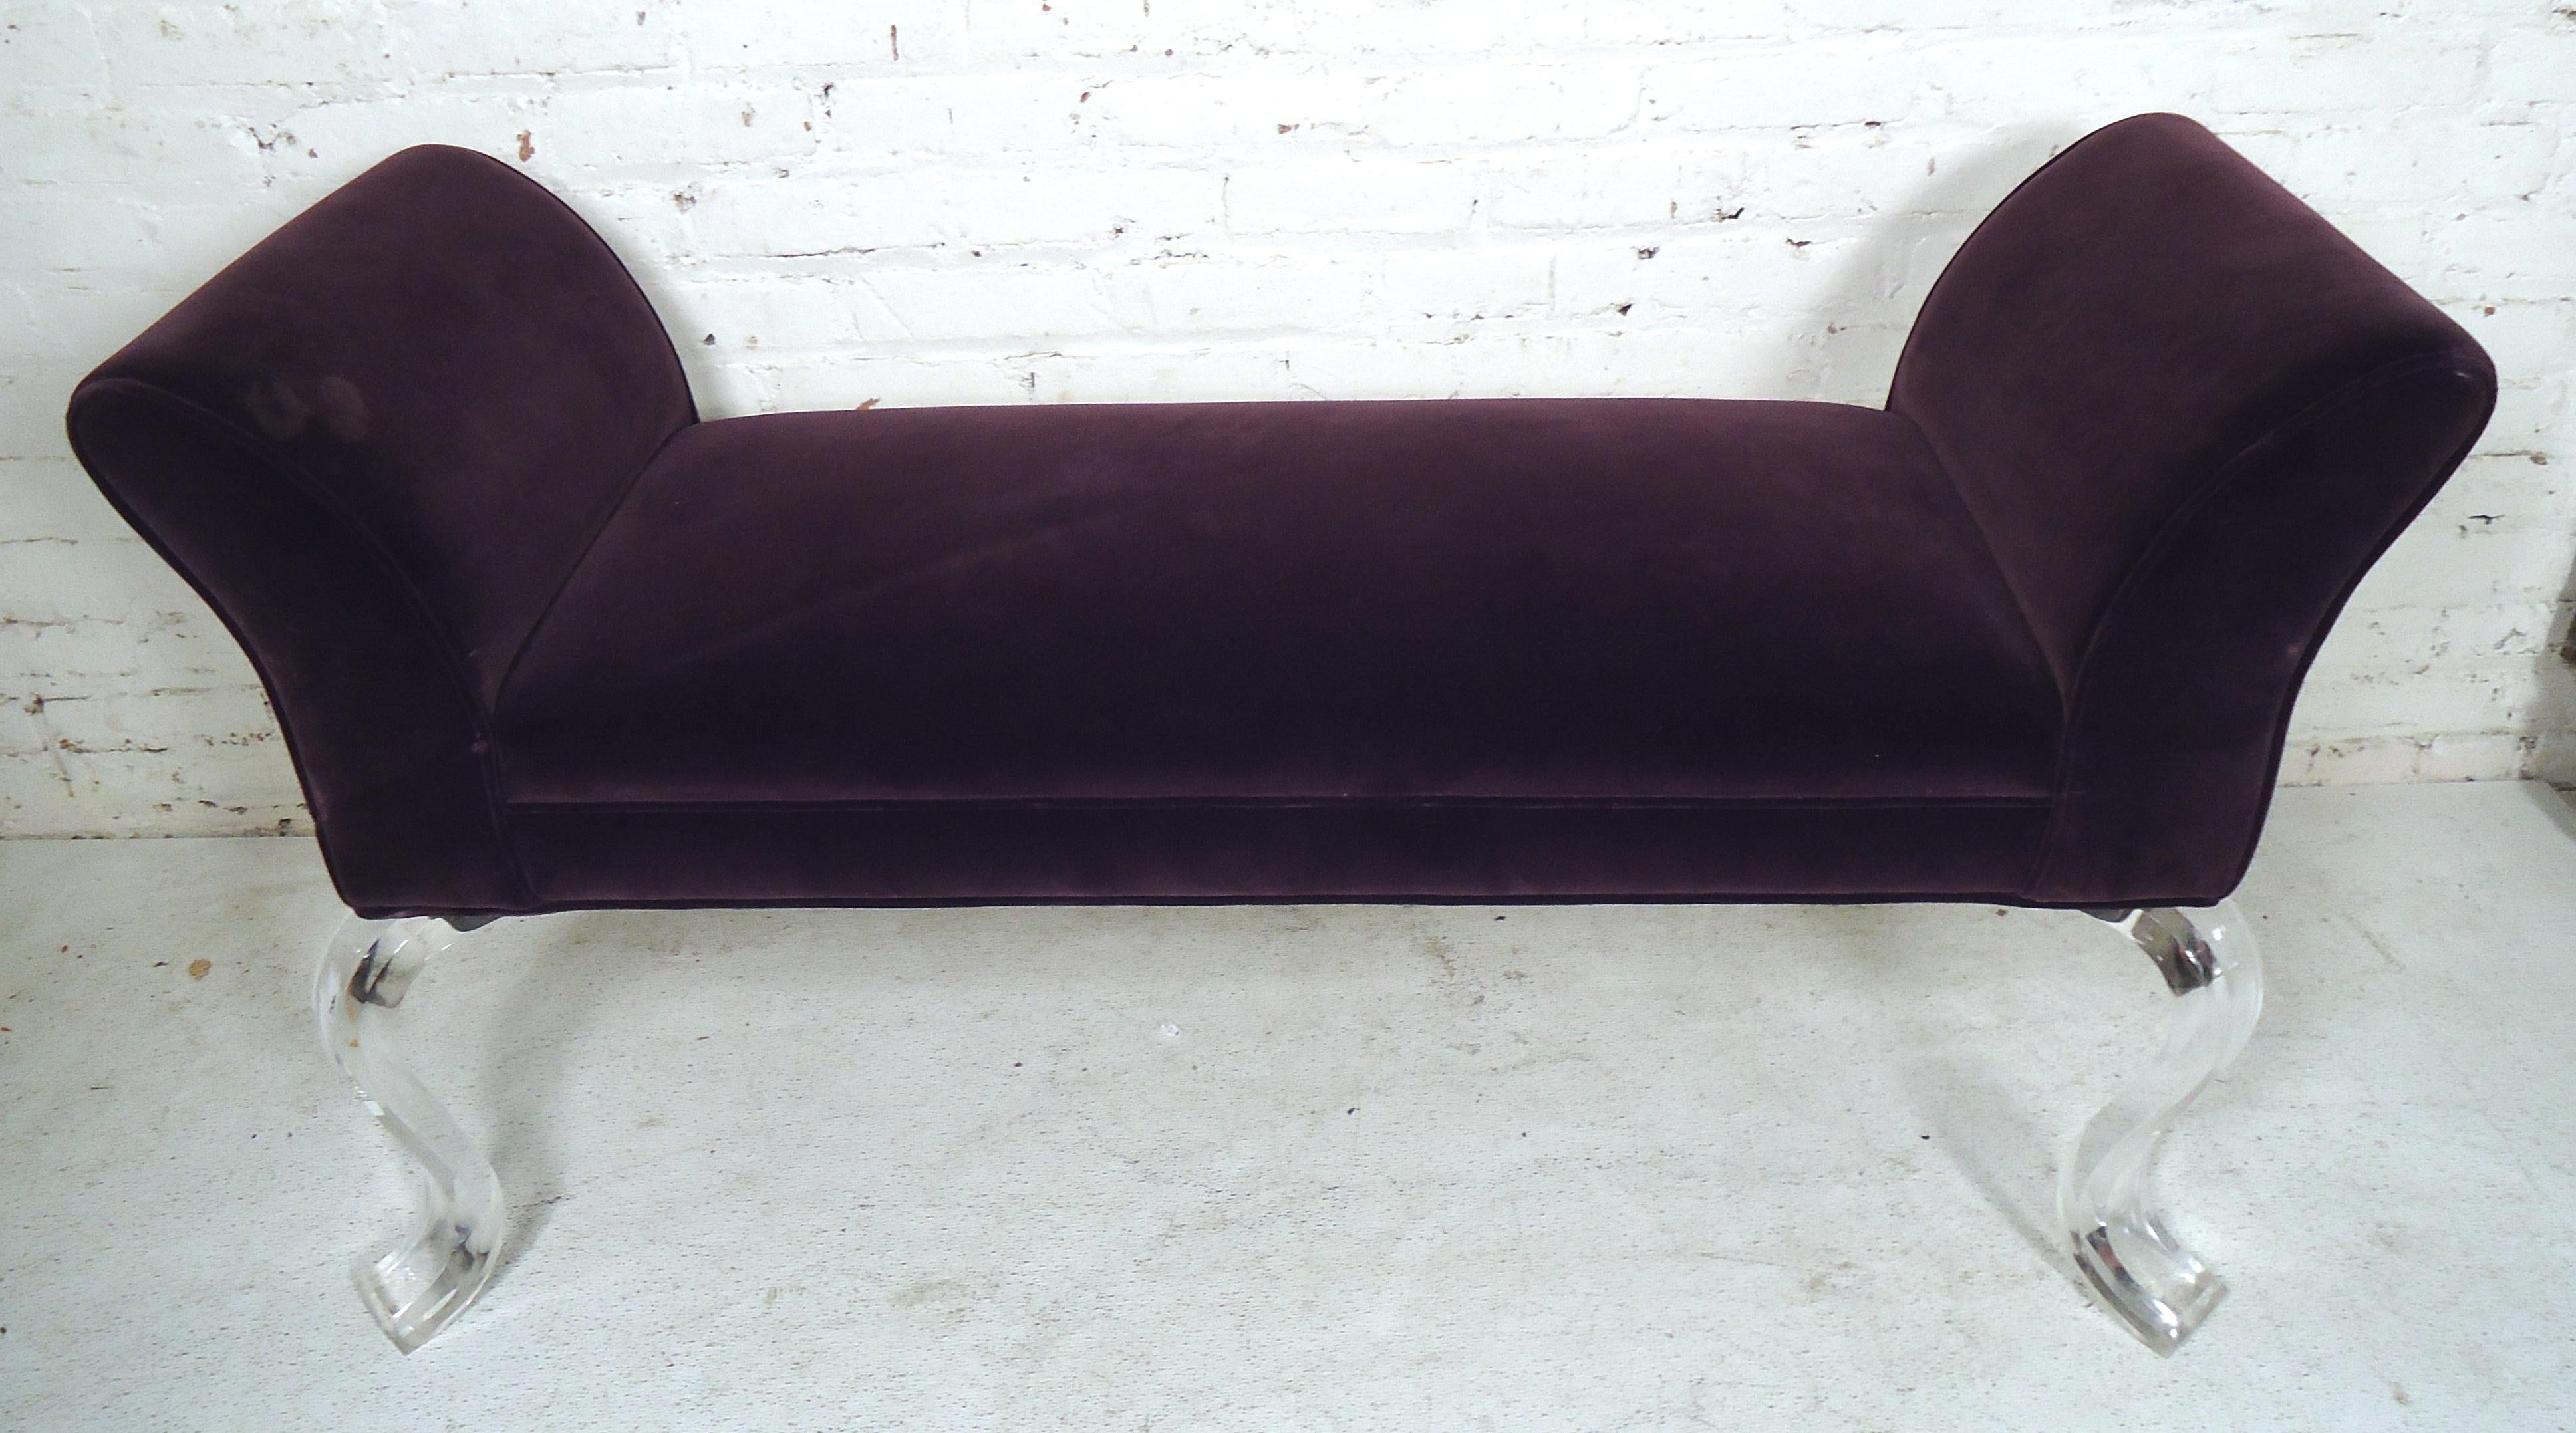 This Mid-Century Modern style bench is featured in purple upholstery on a set of curved Lucite legs, can be used as an entry way or bedroom bench.

(Please confirm item location - NY or NJ - with dealer).